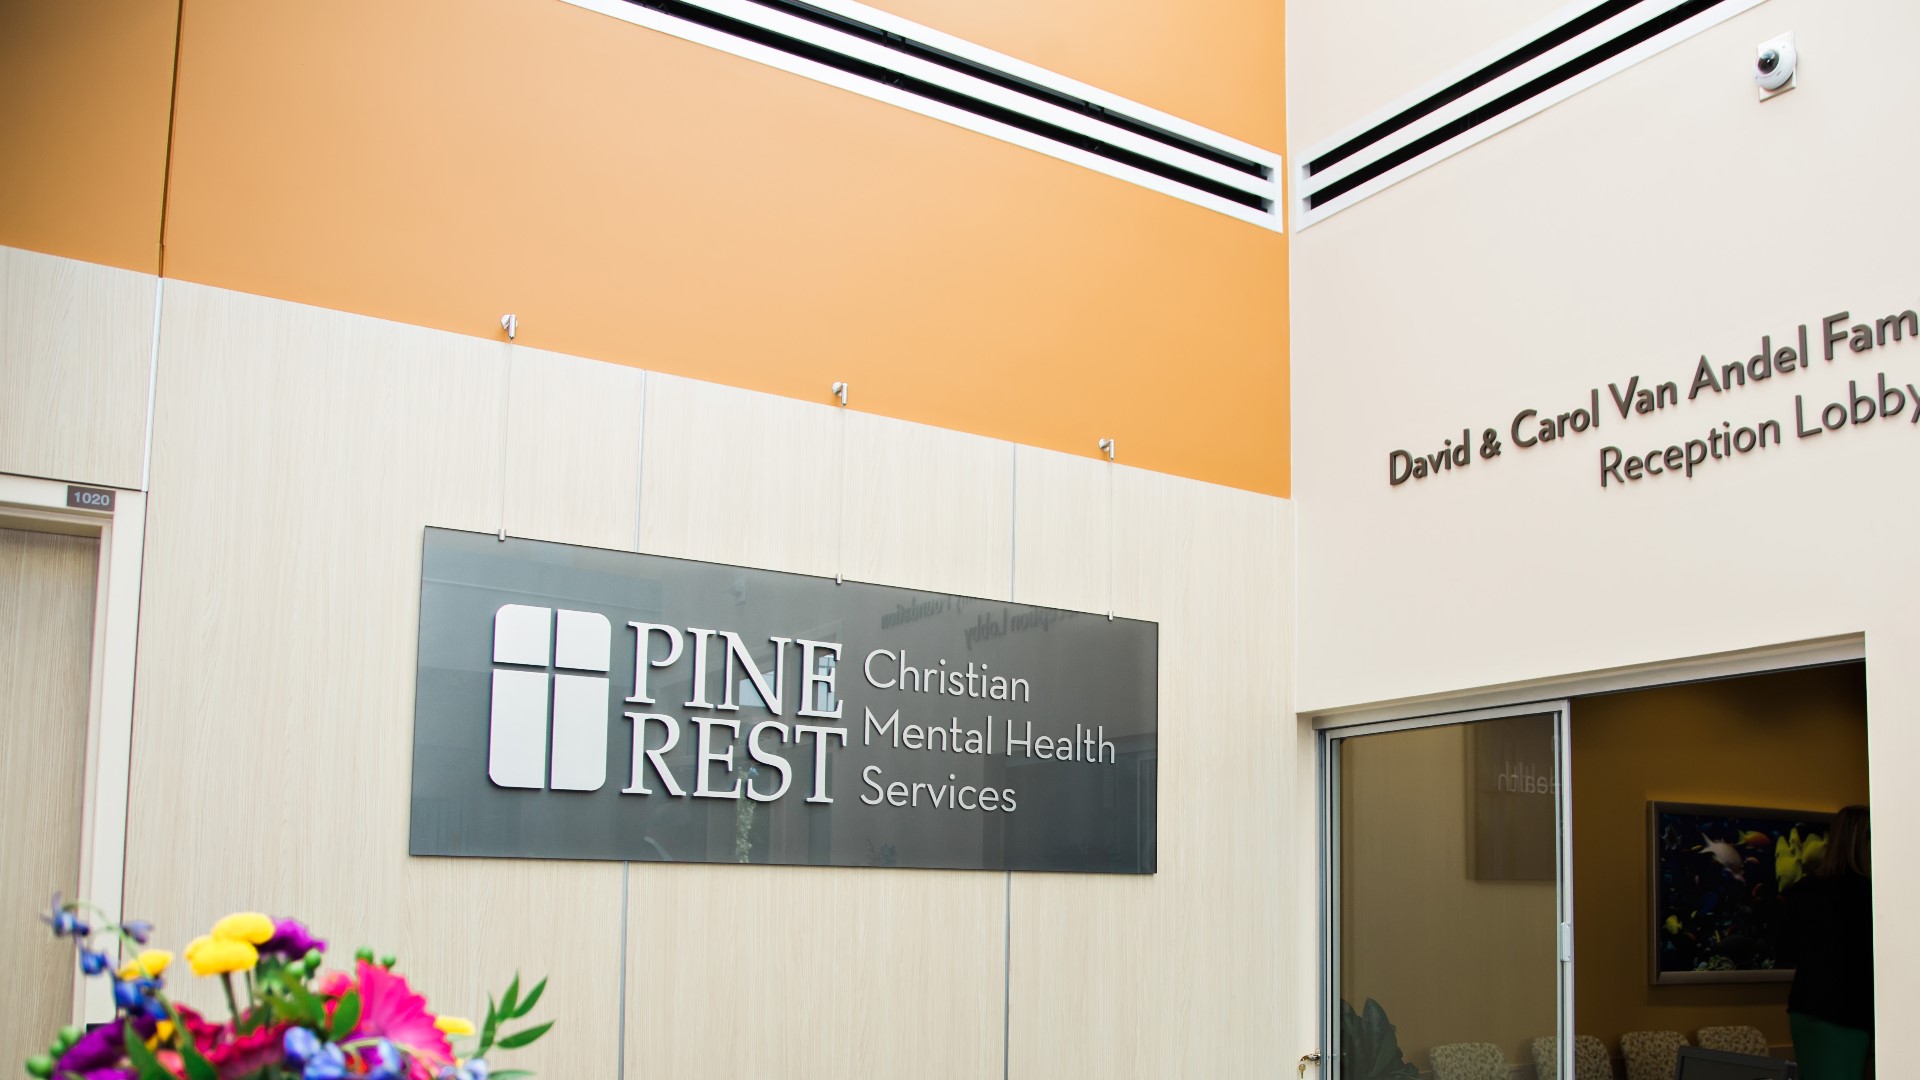 Pine Rest Christian Mental Health Services has released a report that predicts Michigan will experience a mental health crisis as a result of the COVID-19 pandemic.